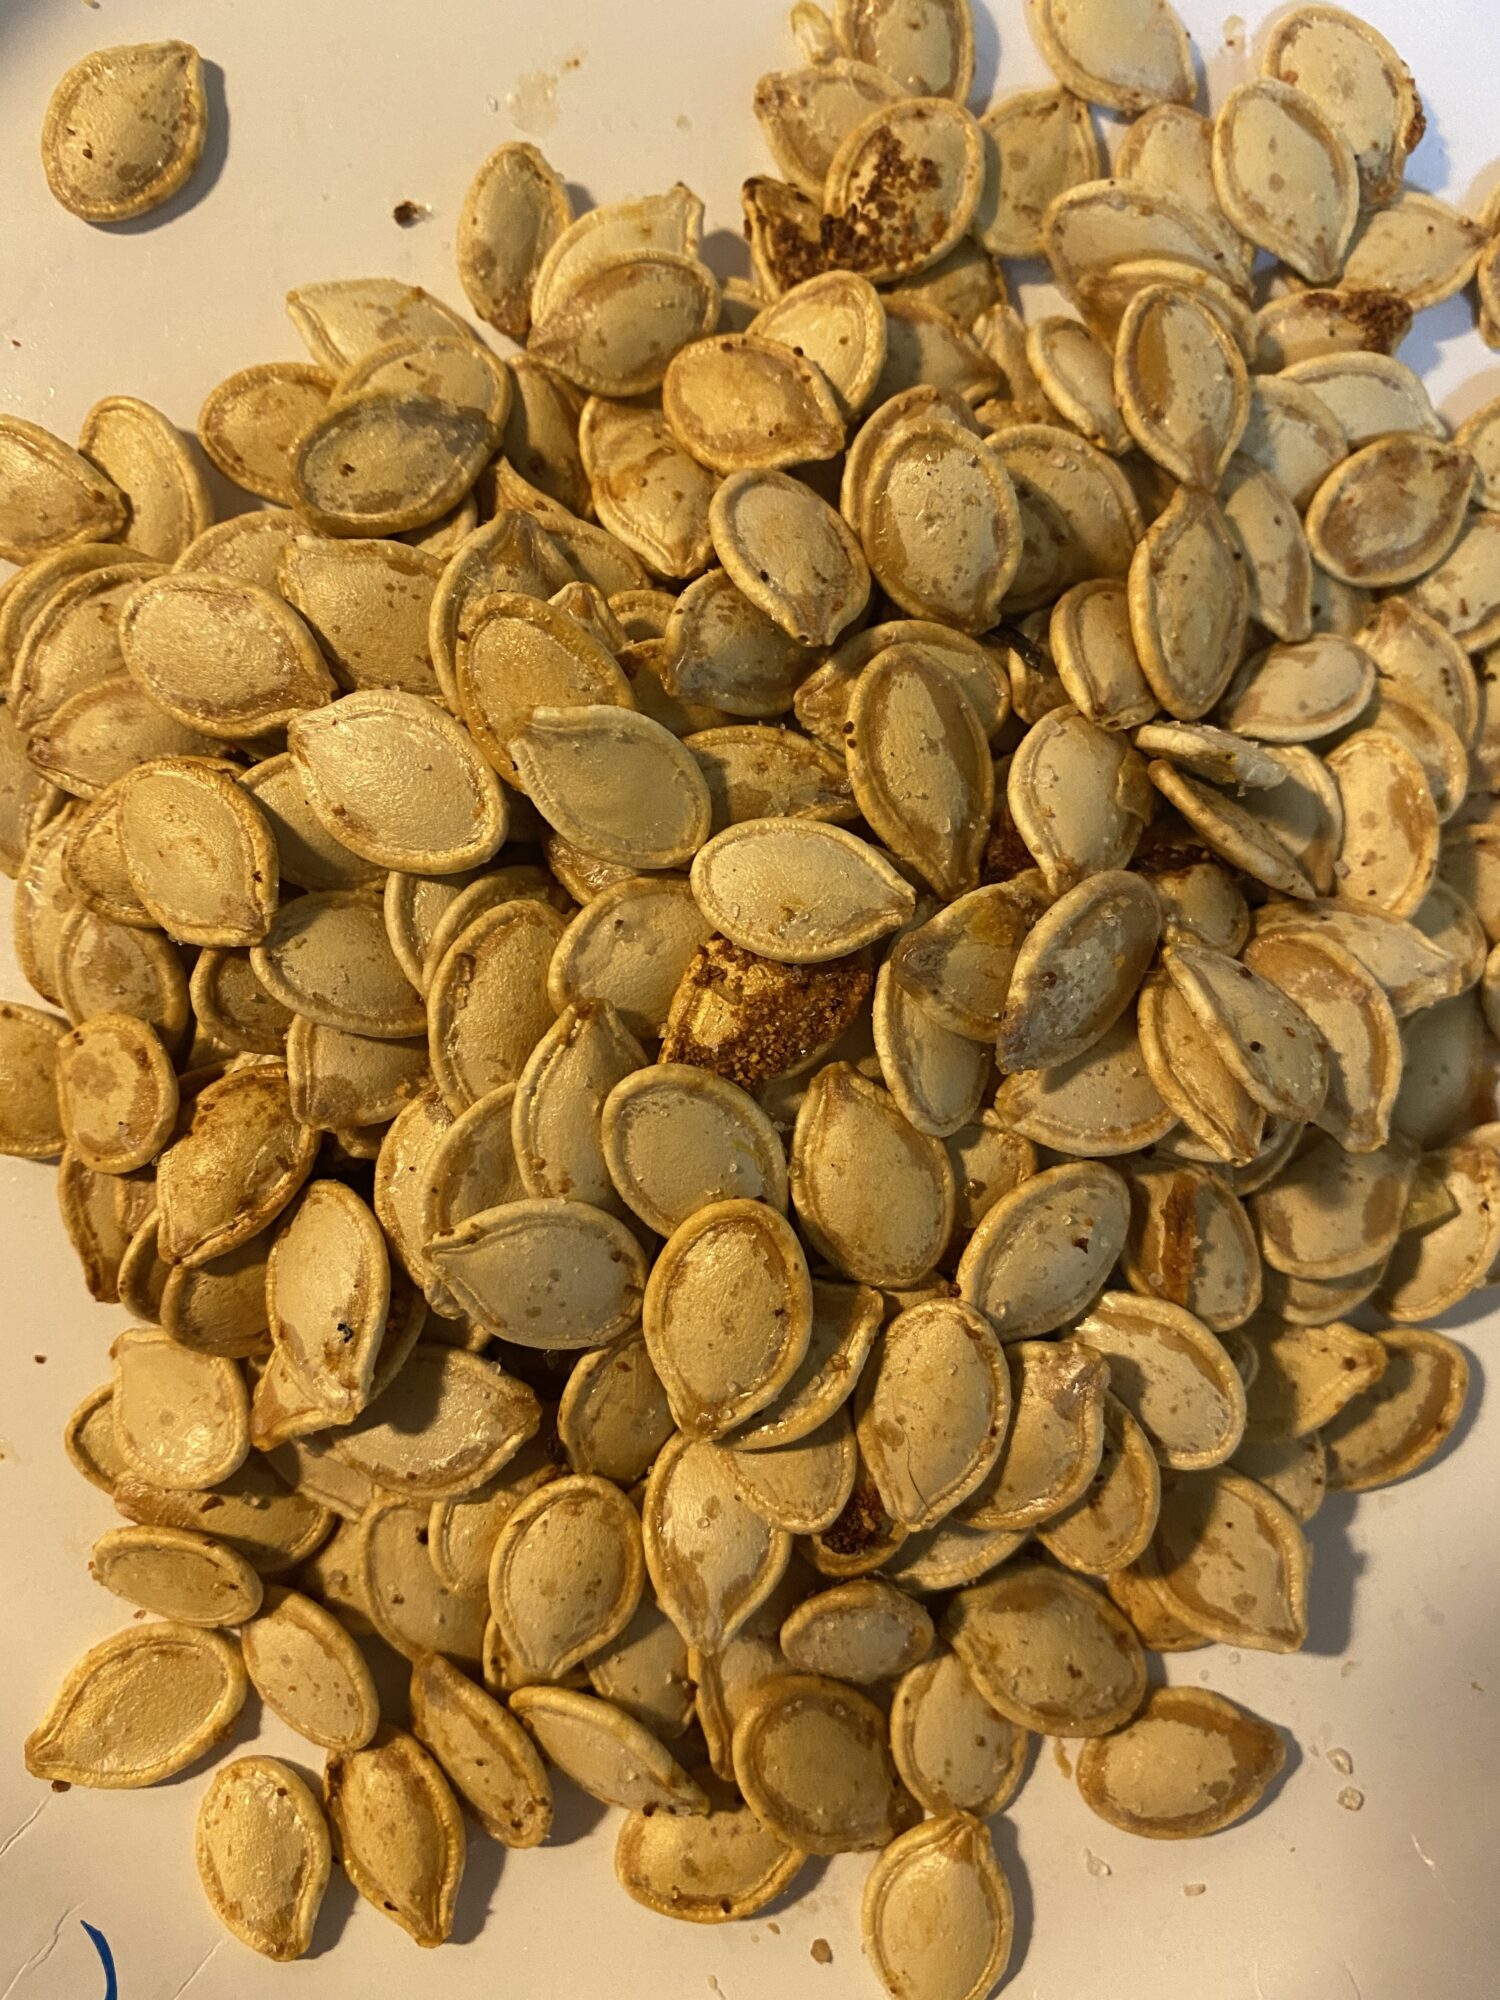 Air Fried pumpkin seeds #pumpkinseeds #airfryer Air fry with 1 teaspoon of seasoning, 1 teaspoon of oil and air fry on 350° for 20-30 minutes. Turning every 5-10 minutes. They burn easy! #pumpkinseeds #airfryer 